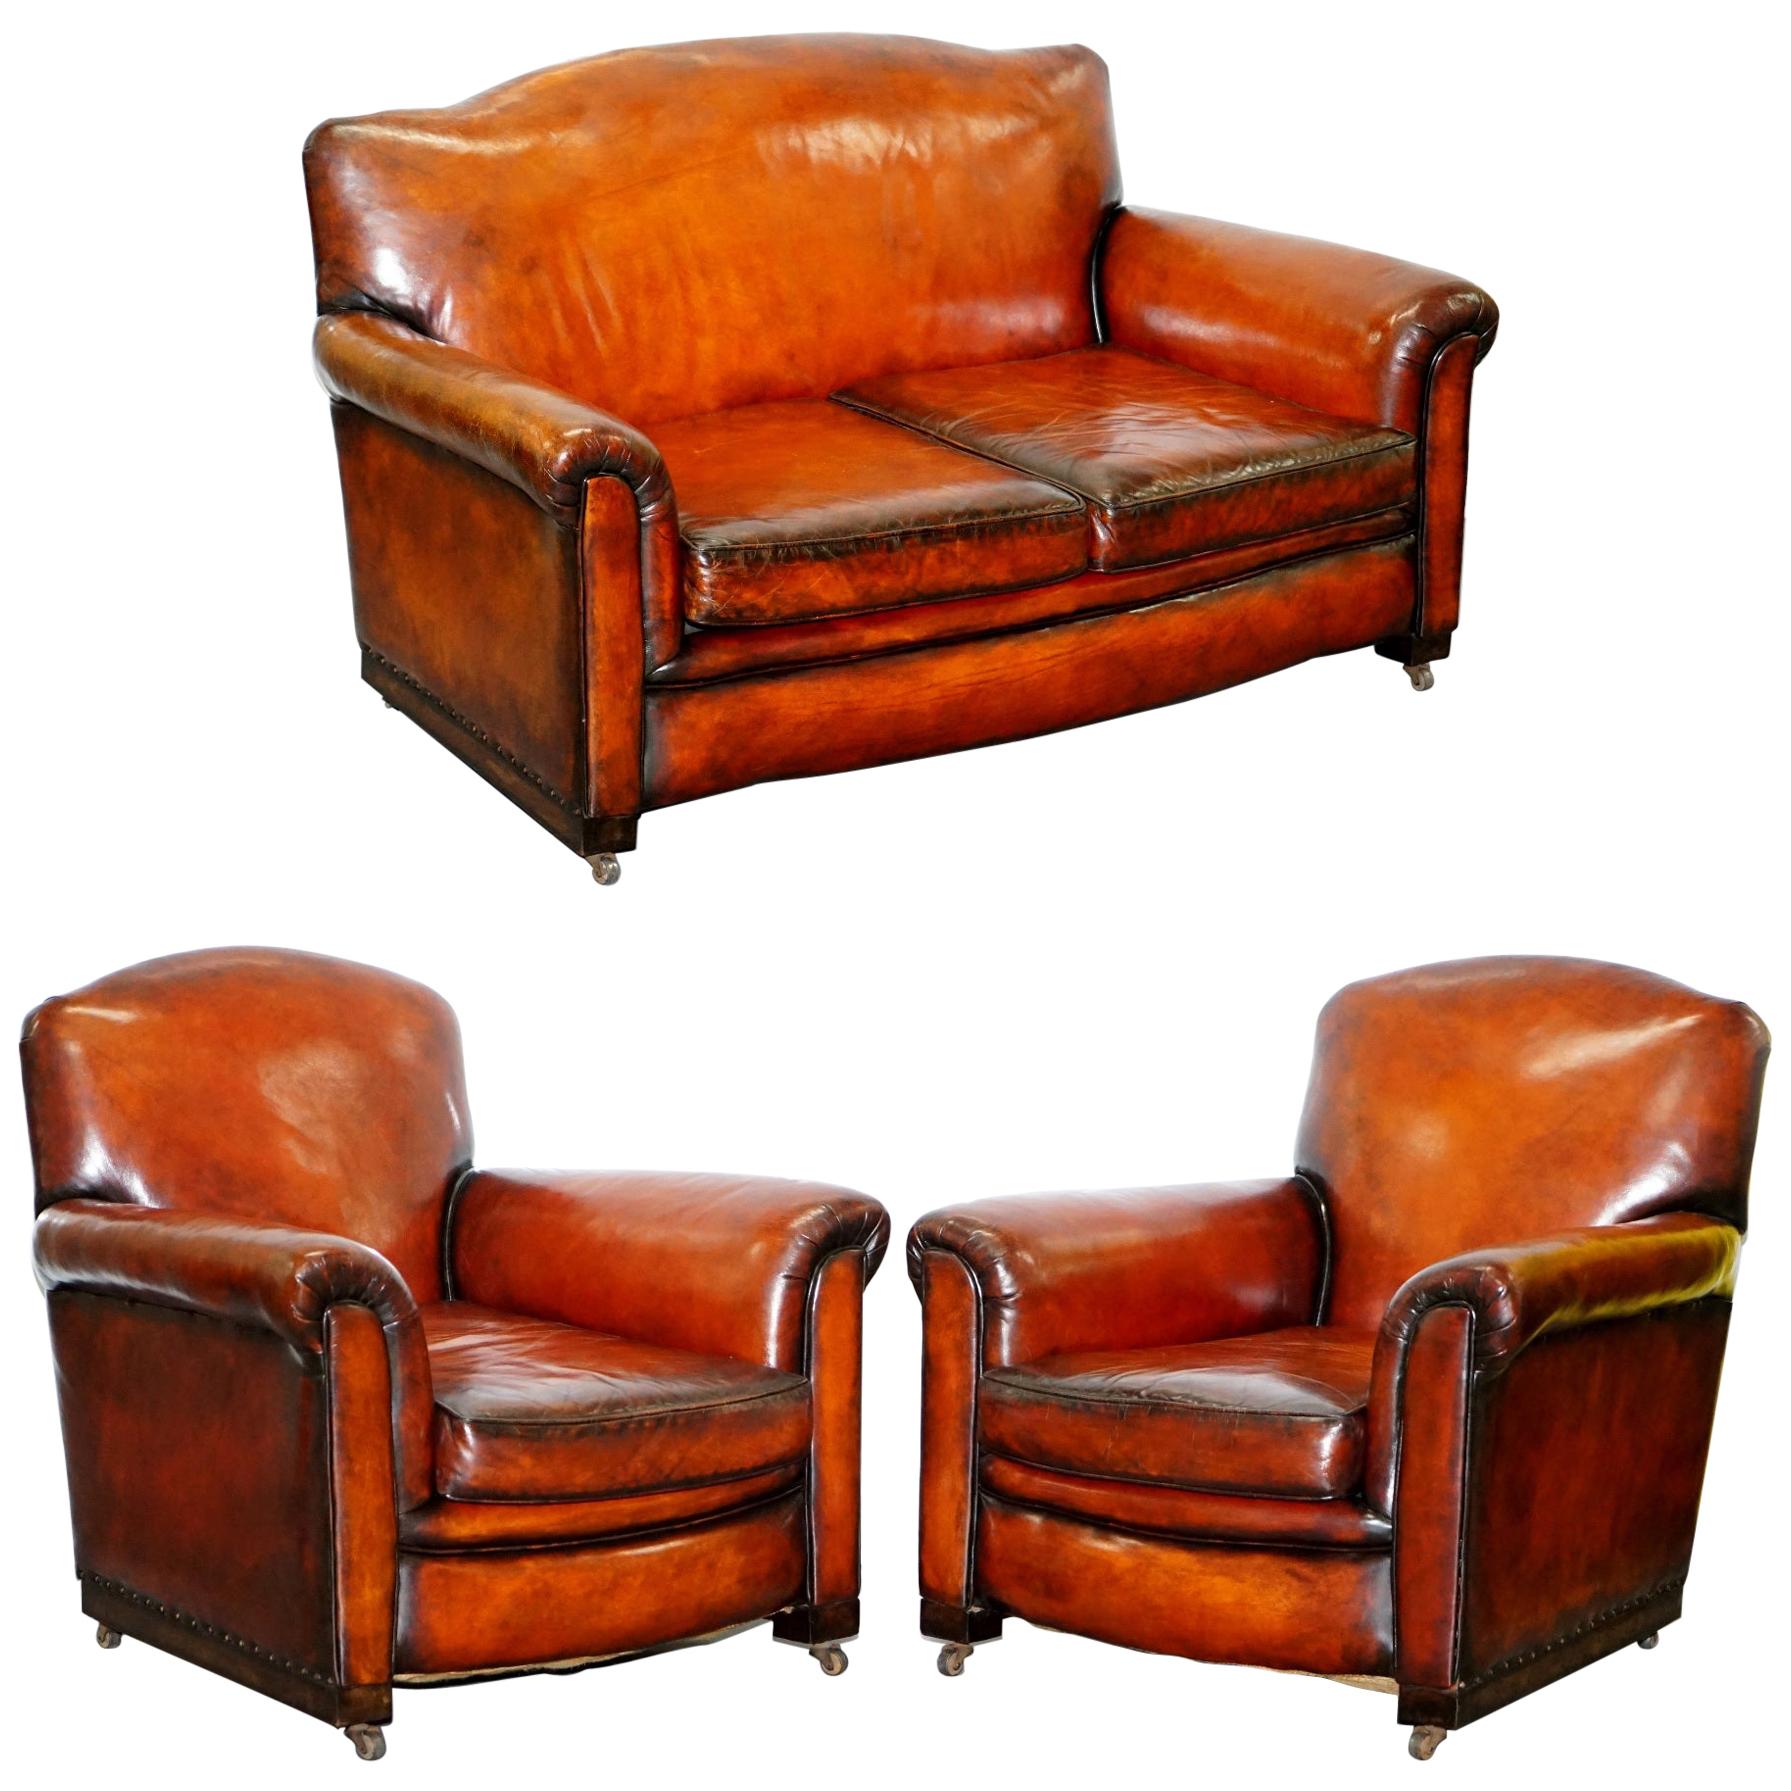 Fully Restored Whisky Brown Leather Sofa & Pair of Armchairs Suite, circa 1900